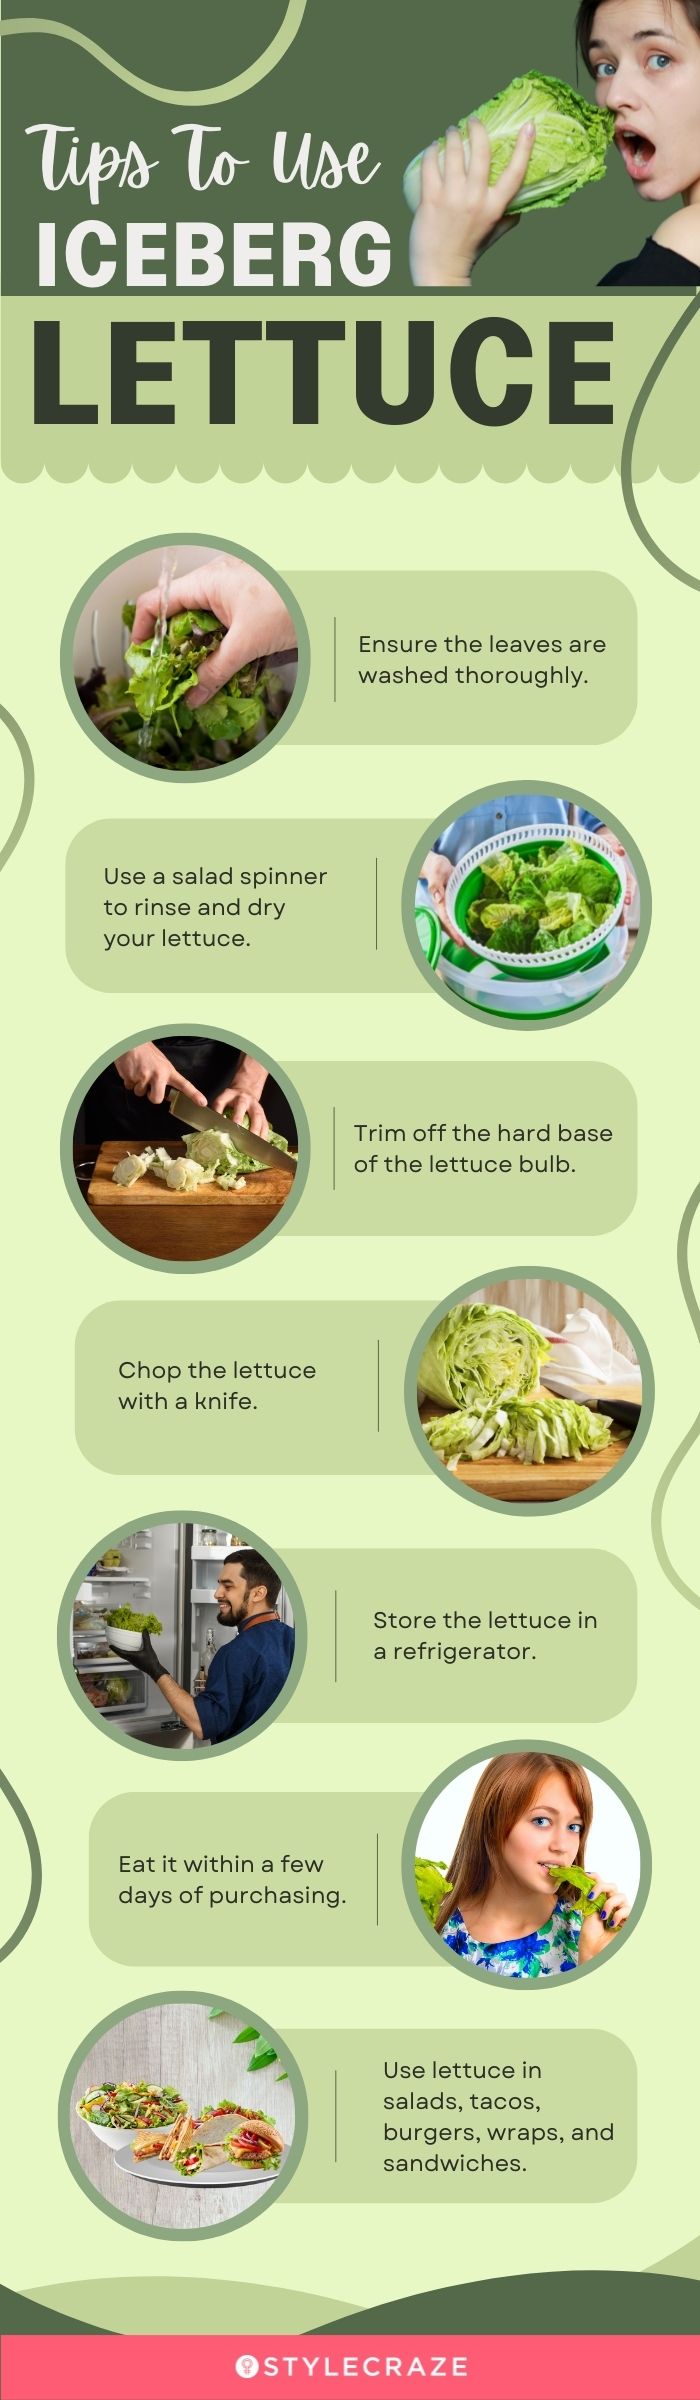 tips to use iceberg lettuce [infographic]